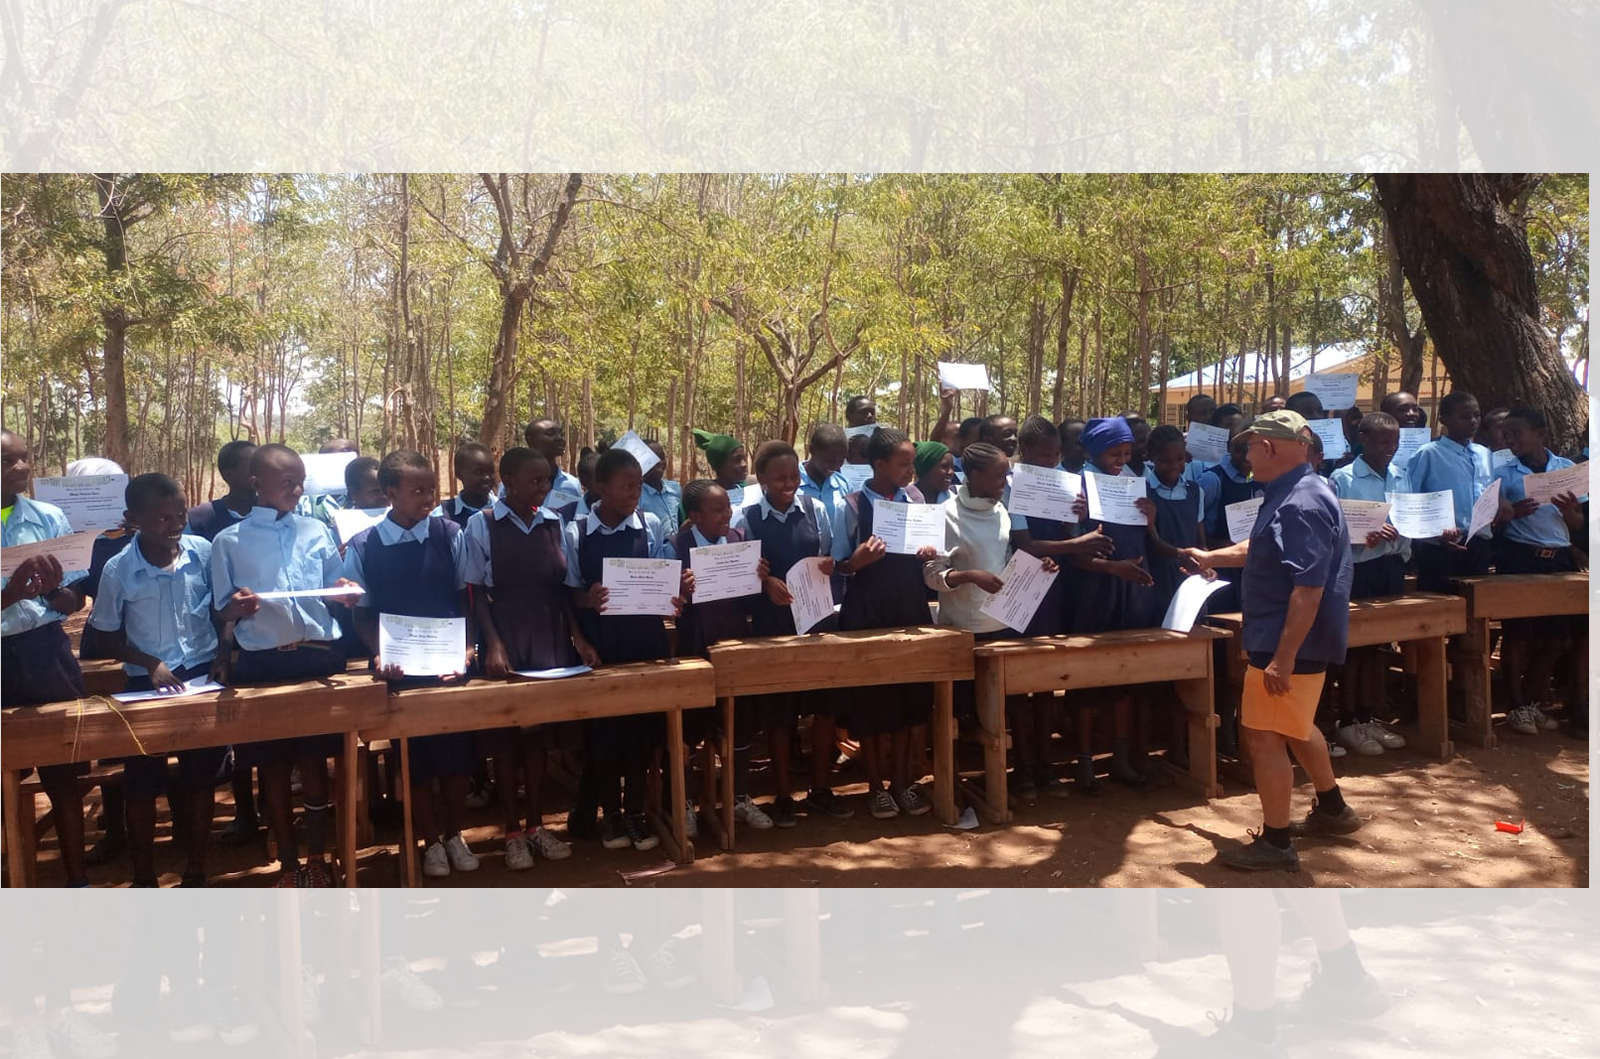 7th ICT graduation for candidates at S.A Gategi primary school.